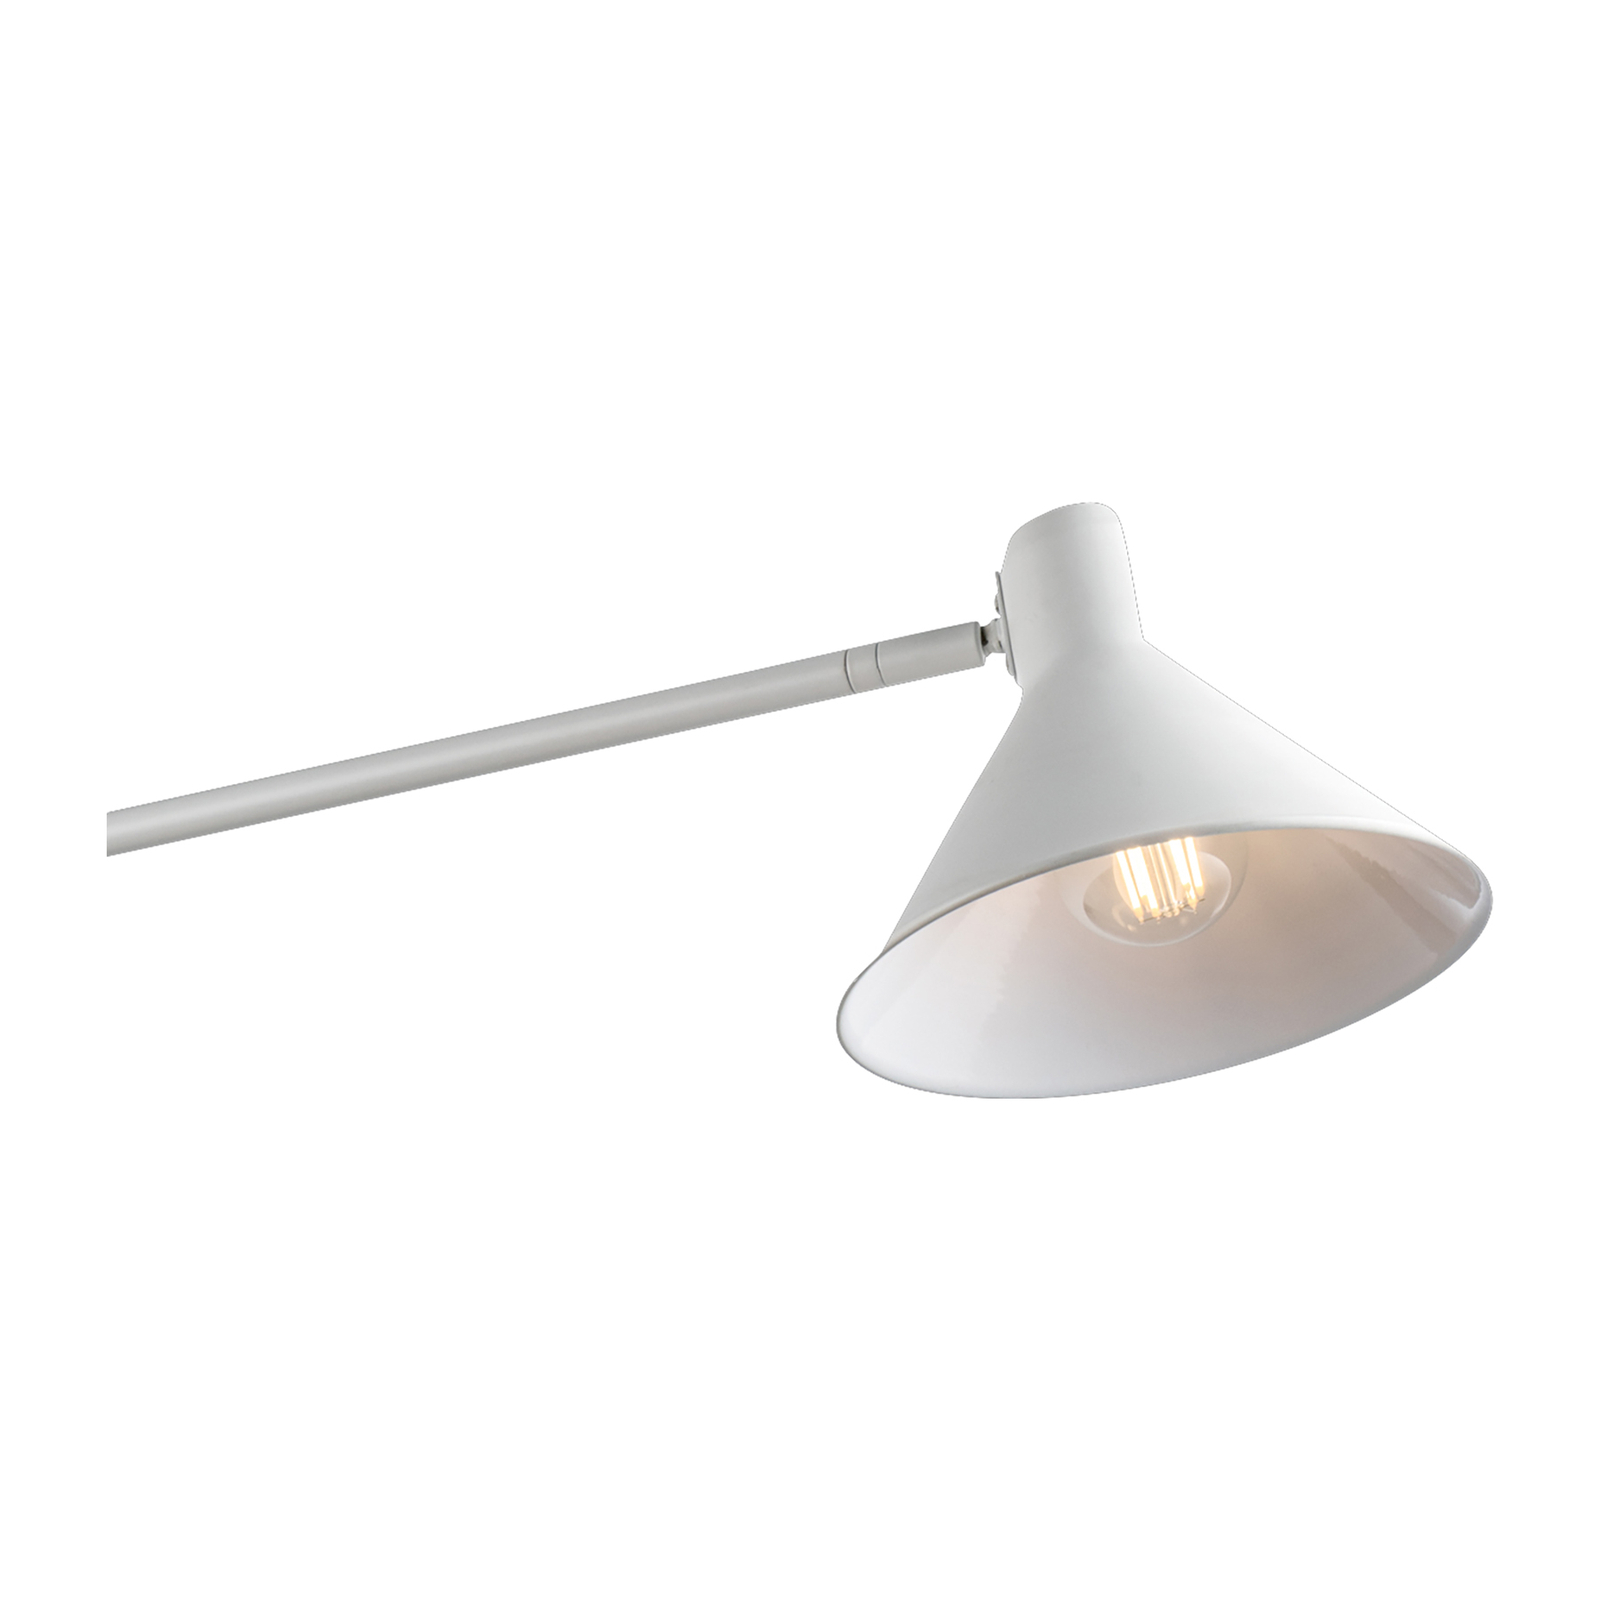 Duetto wall light, two-bulb, metal, white